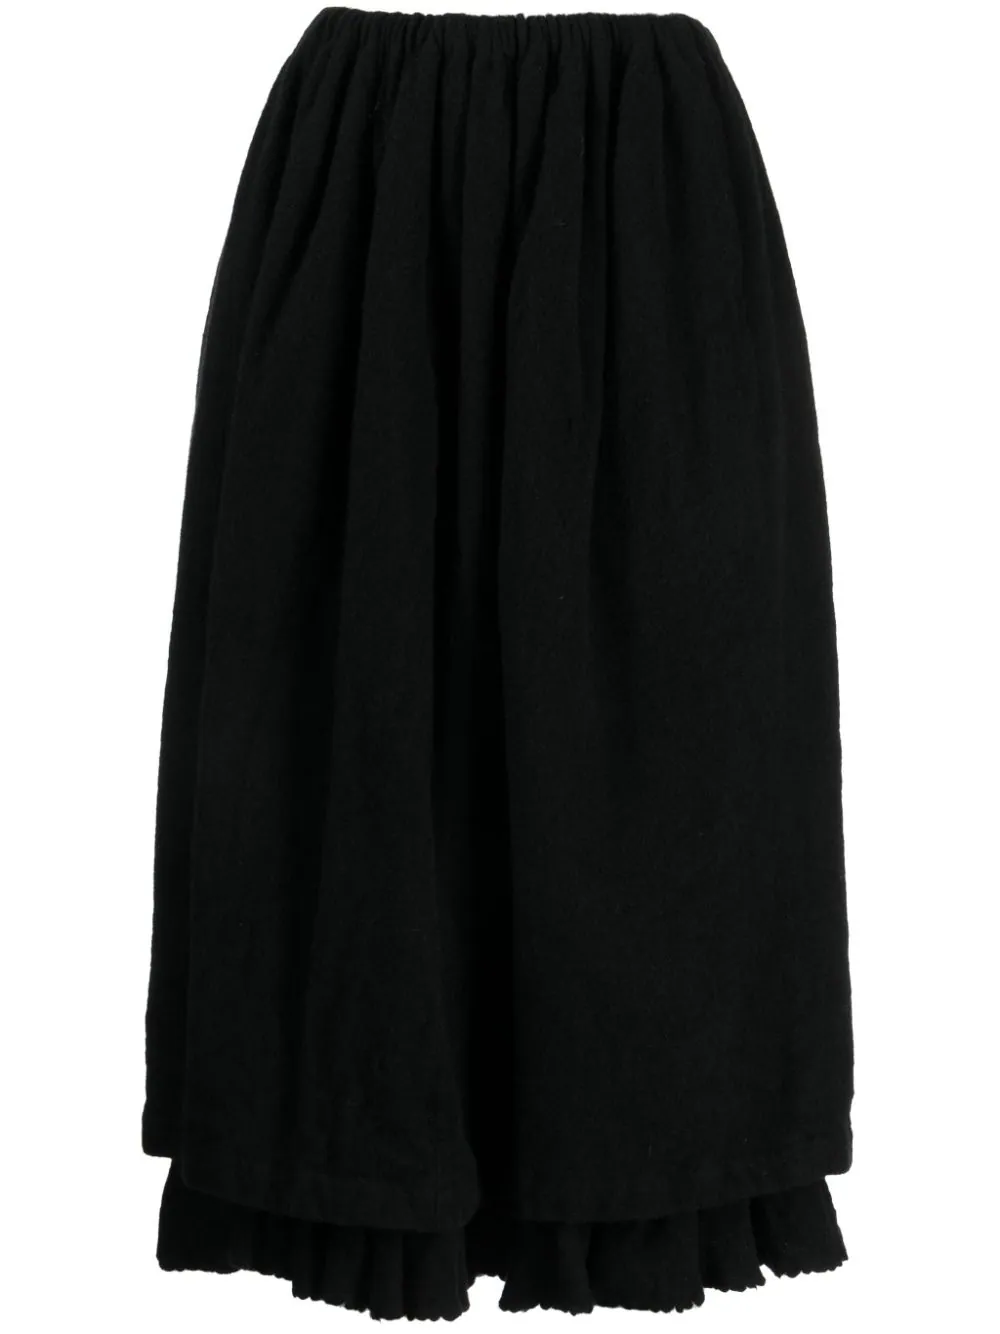 TAO COMME DES GARCONS Women Yarn Dyed Wool Skirt